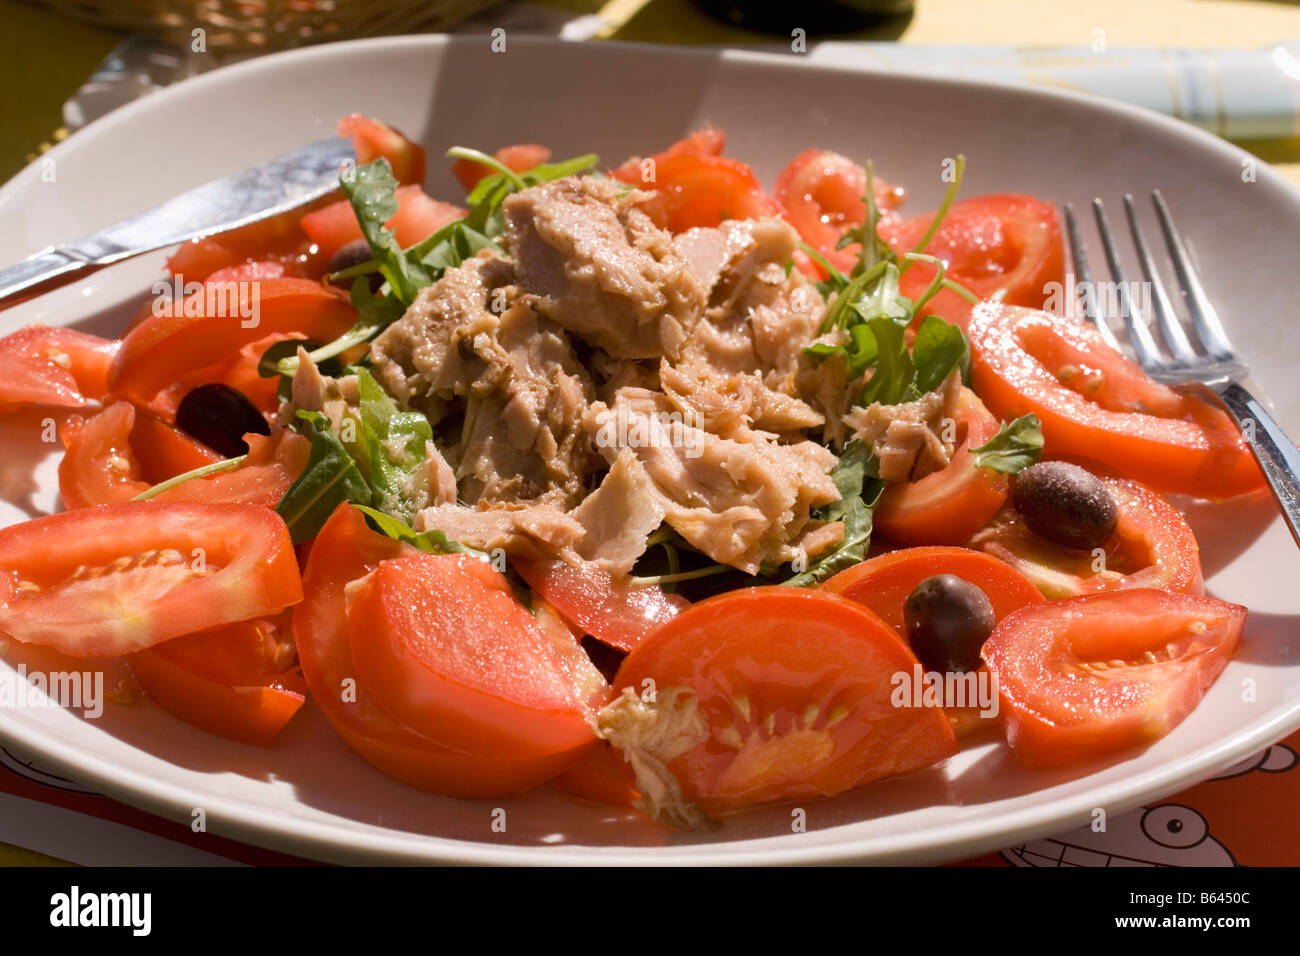 An Italian style tuna salad plate at an outdoor cafe in Turin Stock Photo